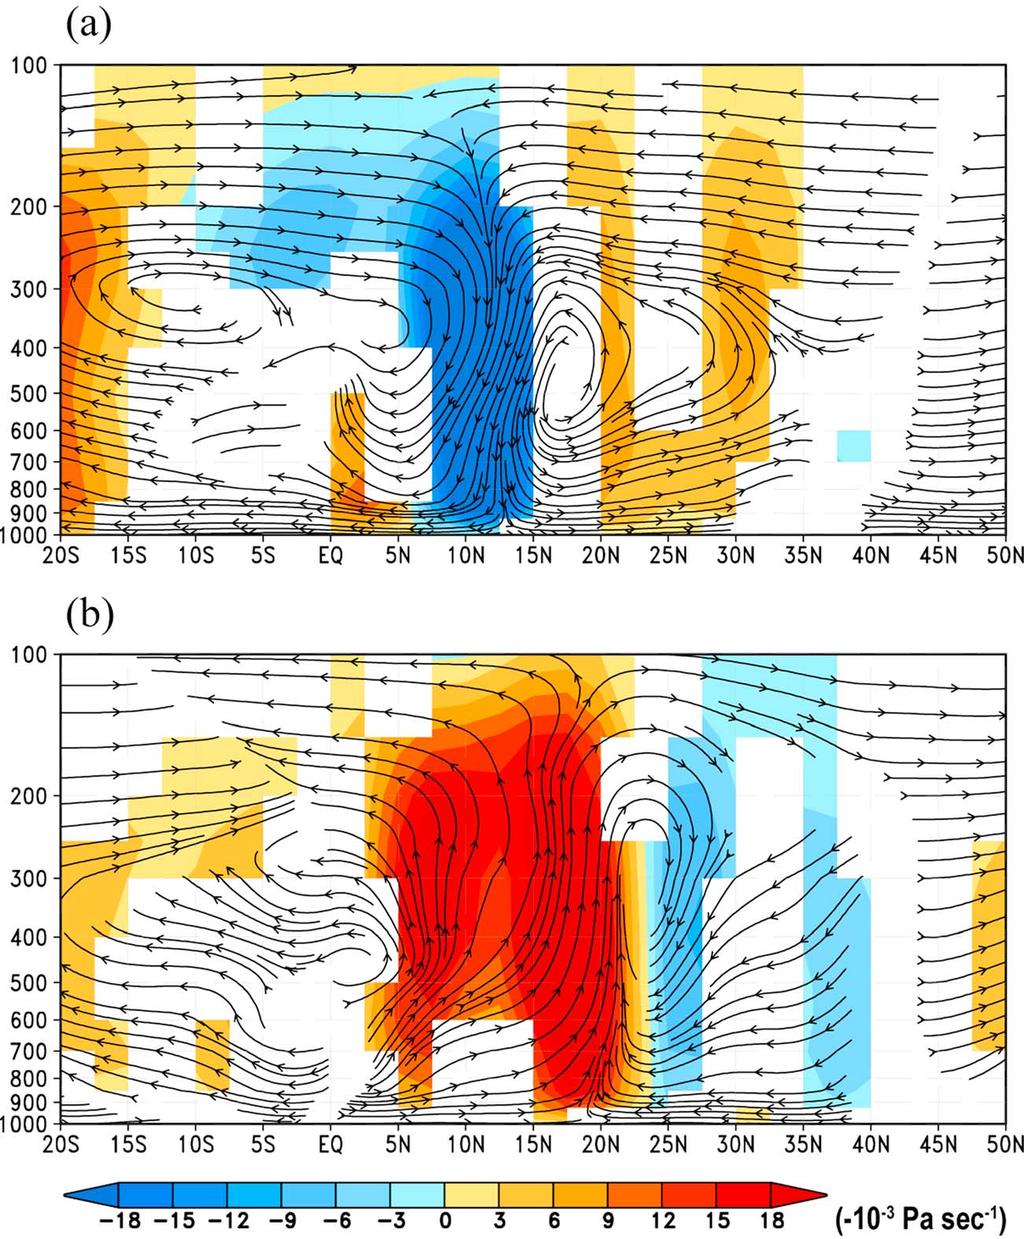 Figure 5. Same as Figure 4 but for meridional and vertical velocities which are averaged for 110 E 130 E.